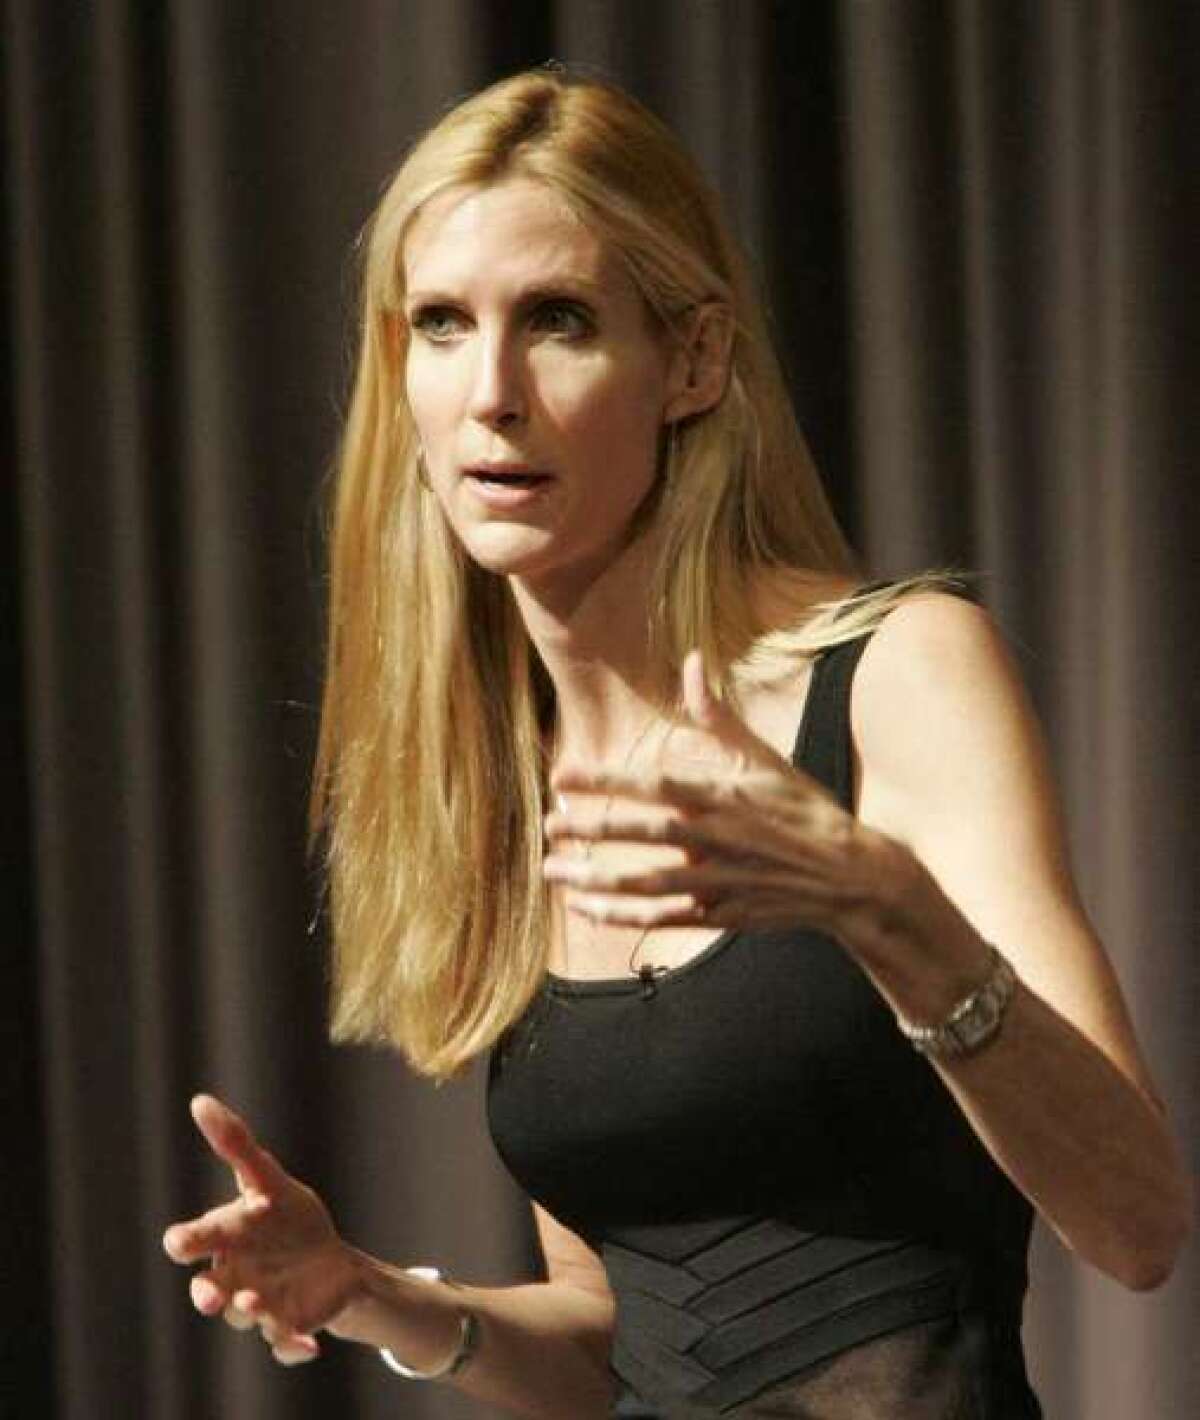 Pundit and author Ann Coulter finds herself in a controversy again over one of her Twitter comments.